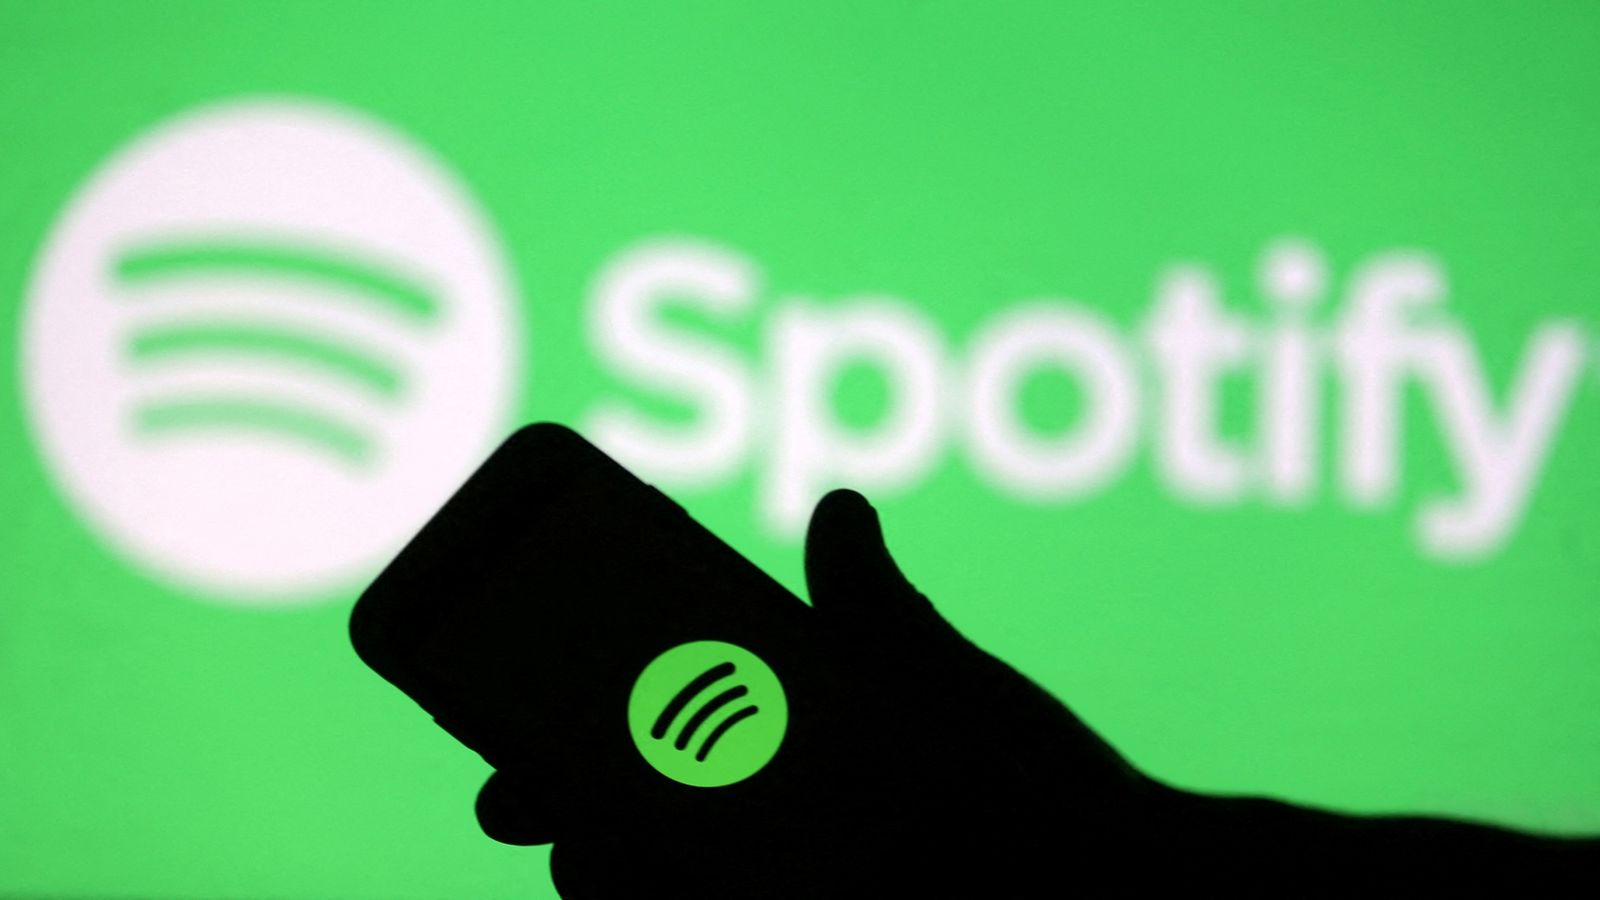 Heardle: Spotify announces it's shutting down the popular name-that-tune game